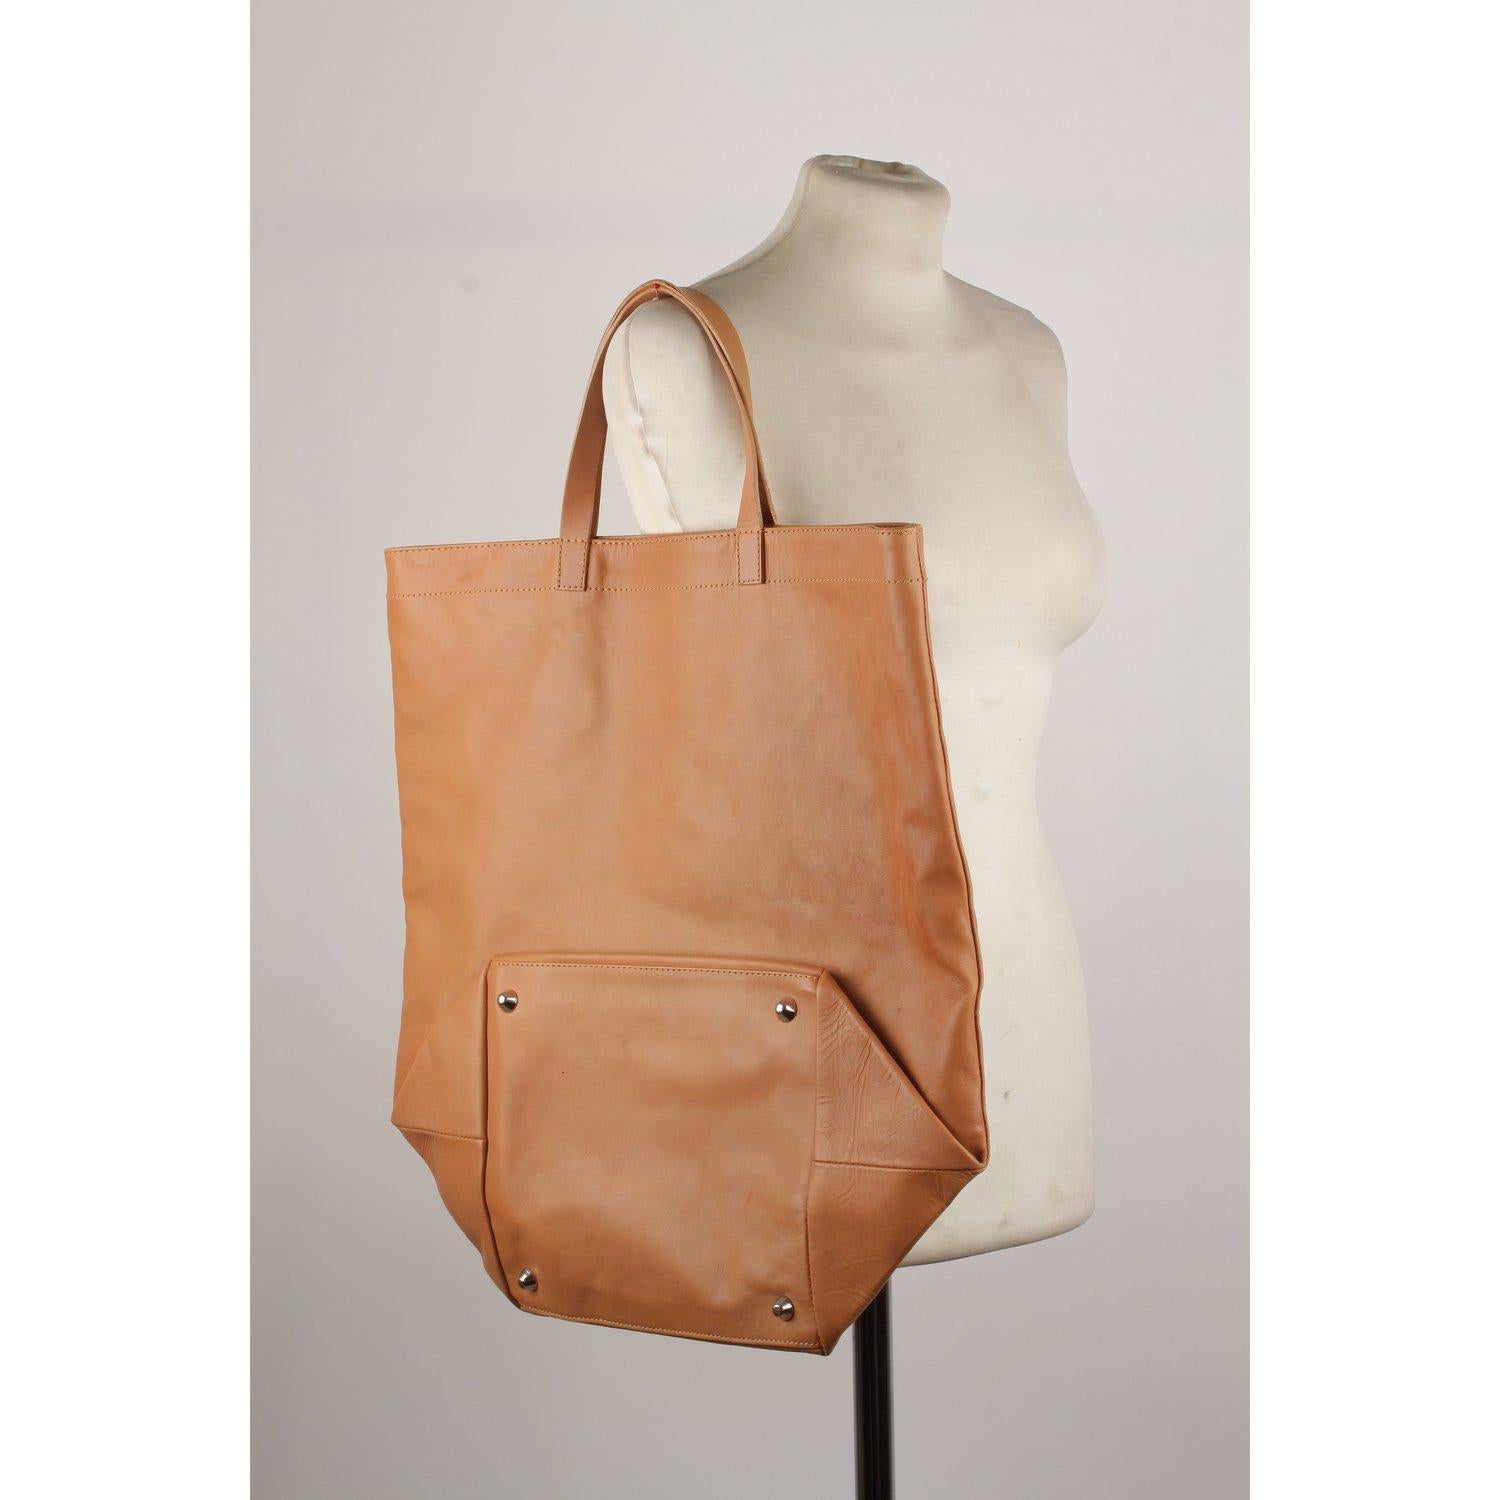 MATERIAL: Leather COLOR: Tan MODEL: Shopping Bag GENDER: Women SIZE: Large Condition CONDITION DETAILS: B :GOOD CONDITION - Some light wear of use - Some scratches on leather due to normal use, some darkness due to normal use on the internal lining,